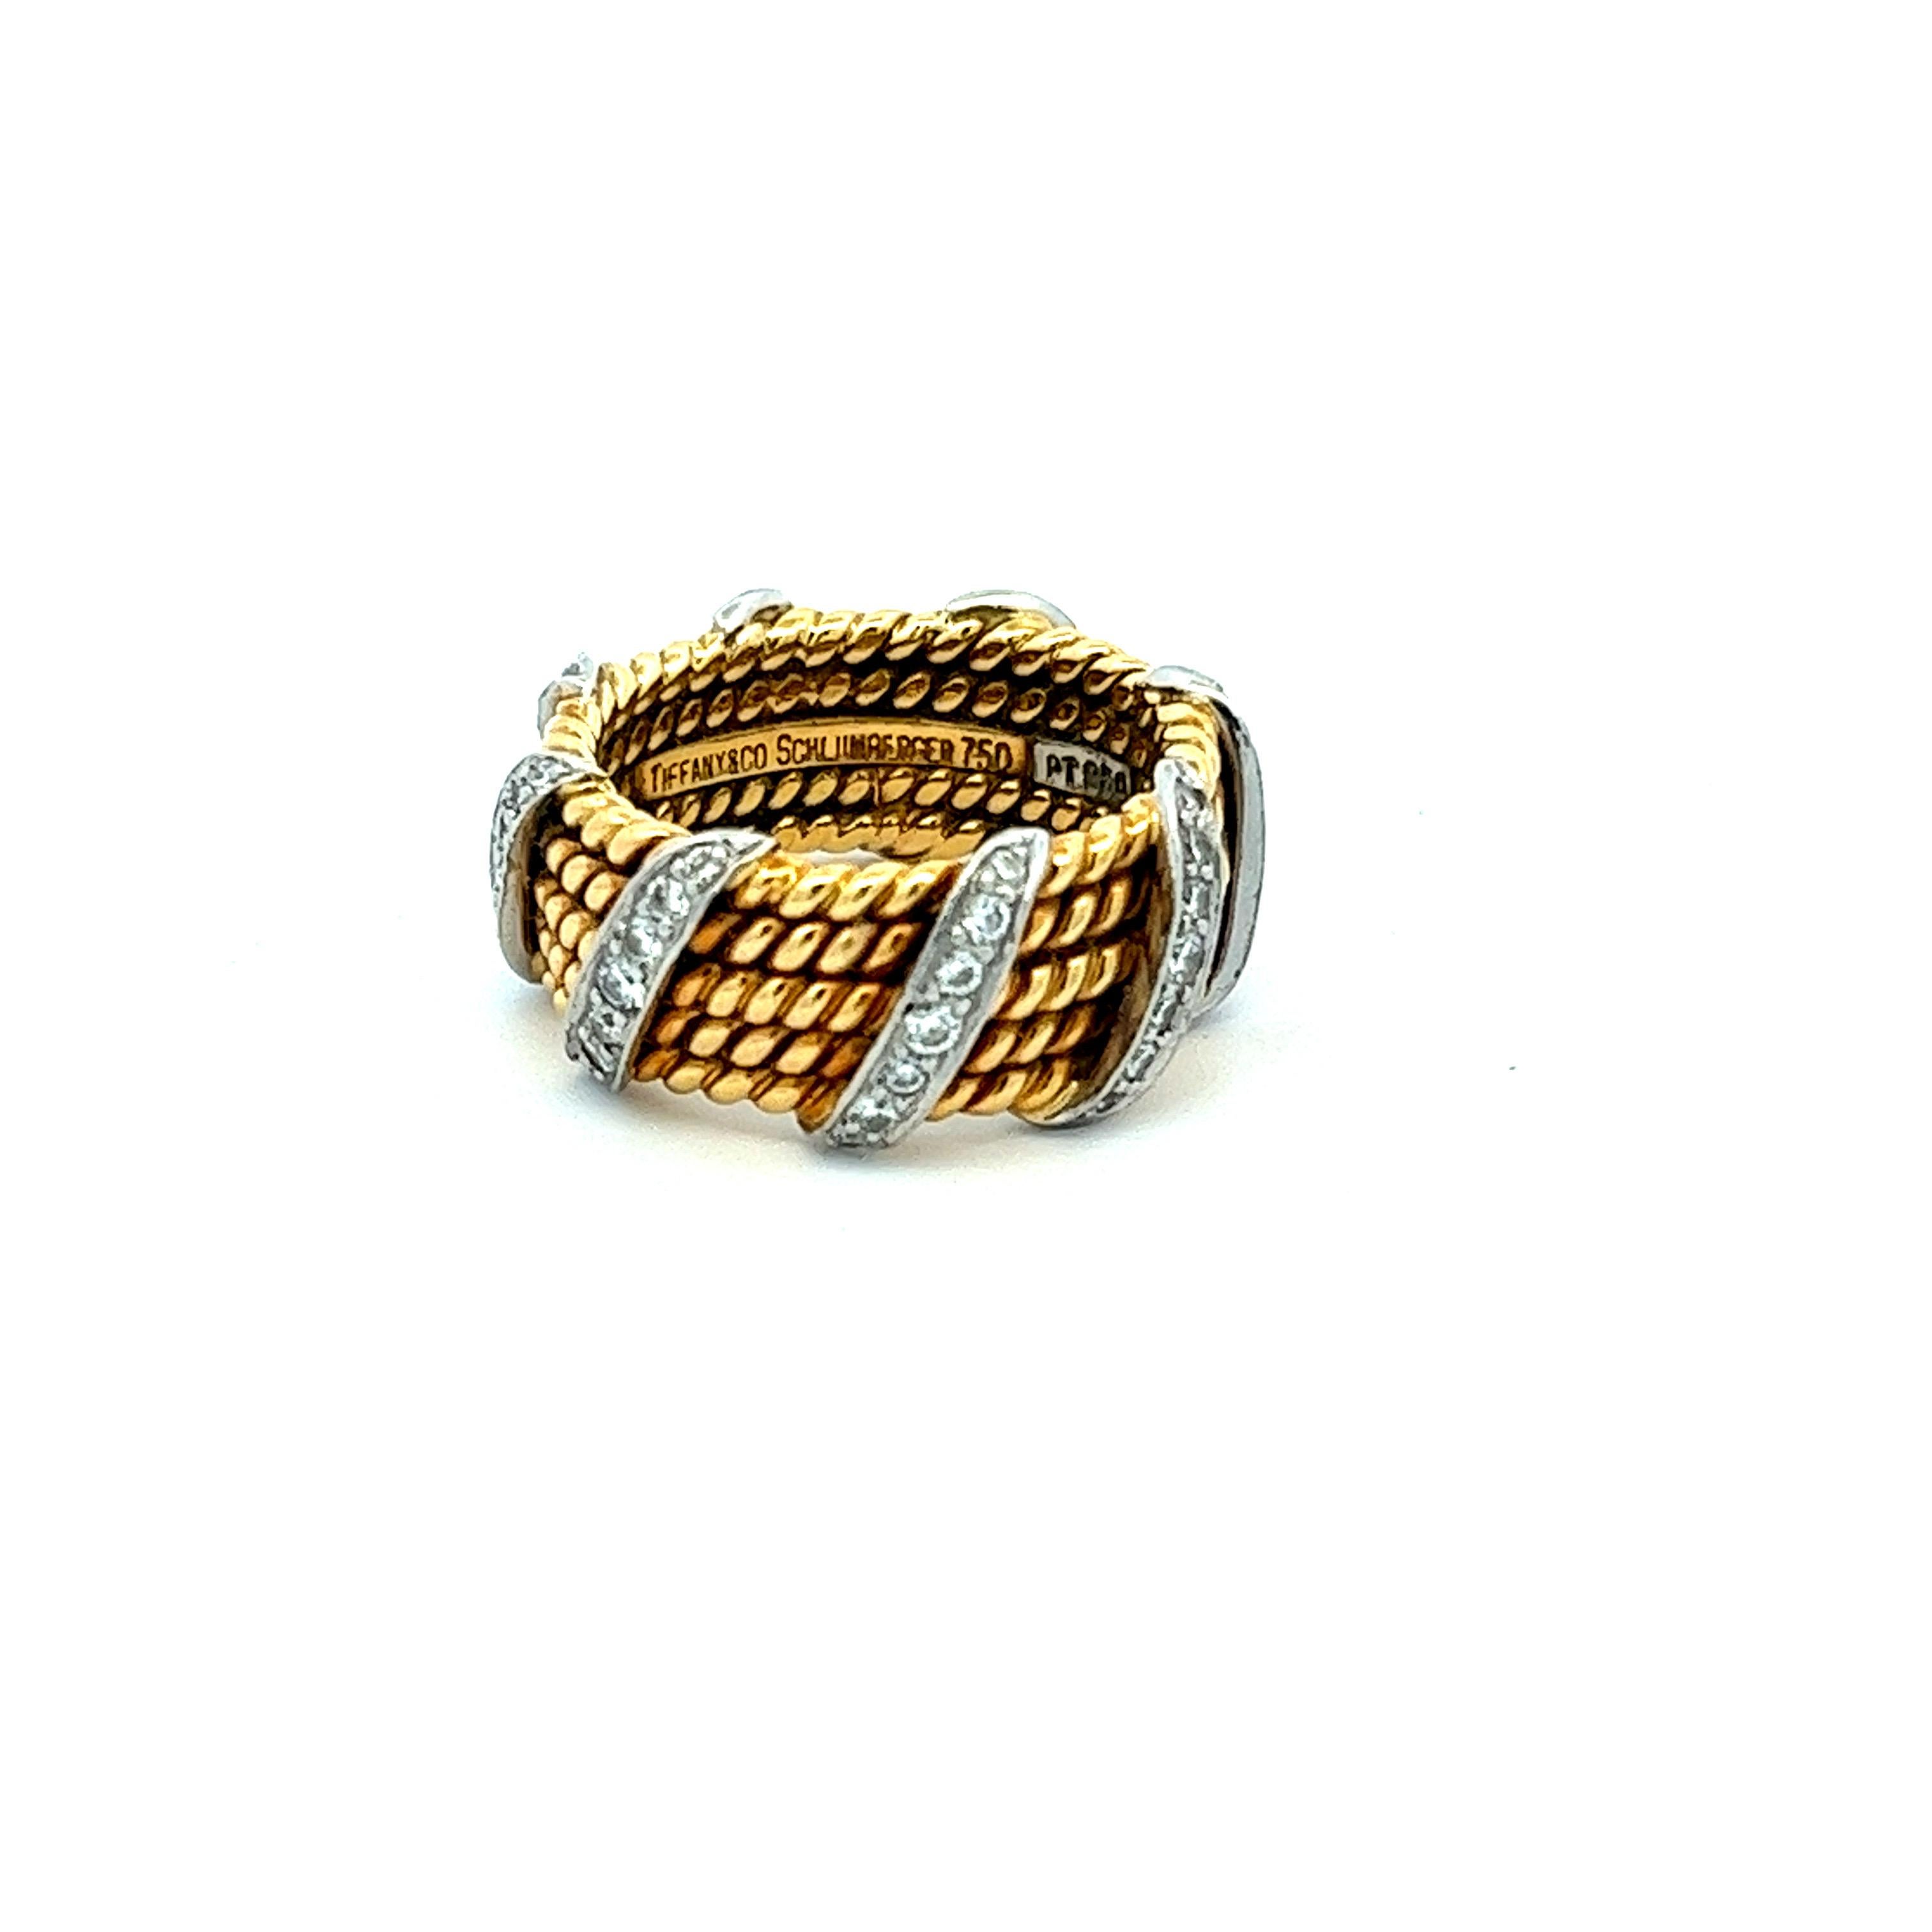 In one of the iconic collaborations with Tiffany & Co., Jean Schlumberger designed this elegant band made of 18 karat yellow gold, platinum and 0.6 carats of diamonds. The designer ring features five rows of yellow gold rope with eight stripes of